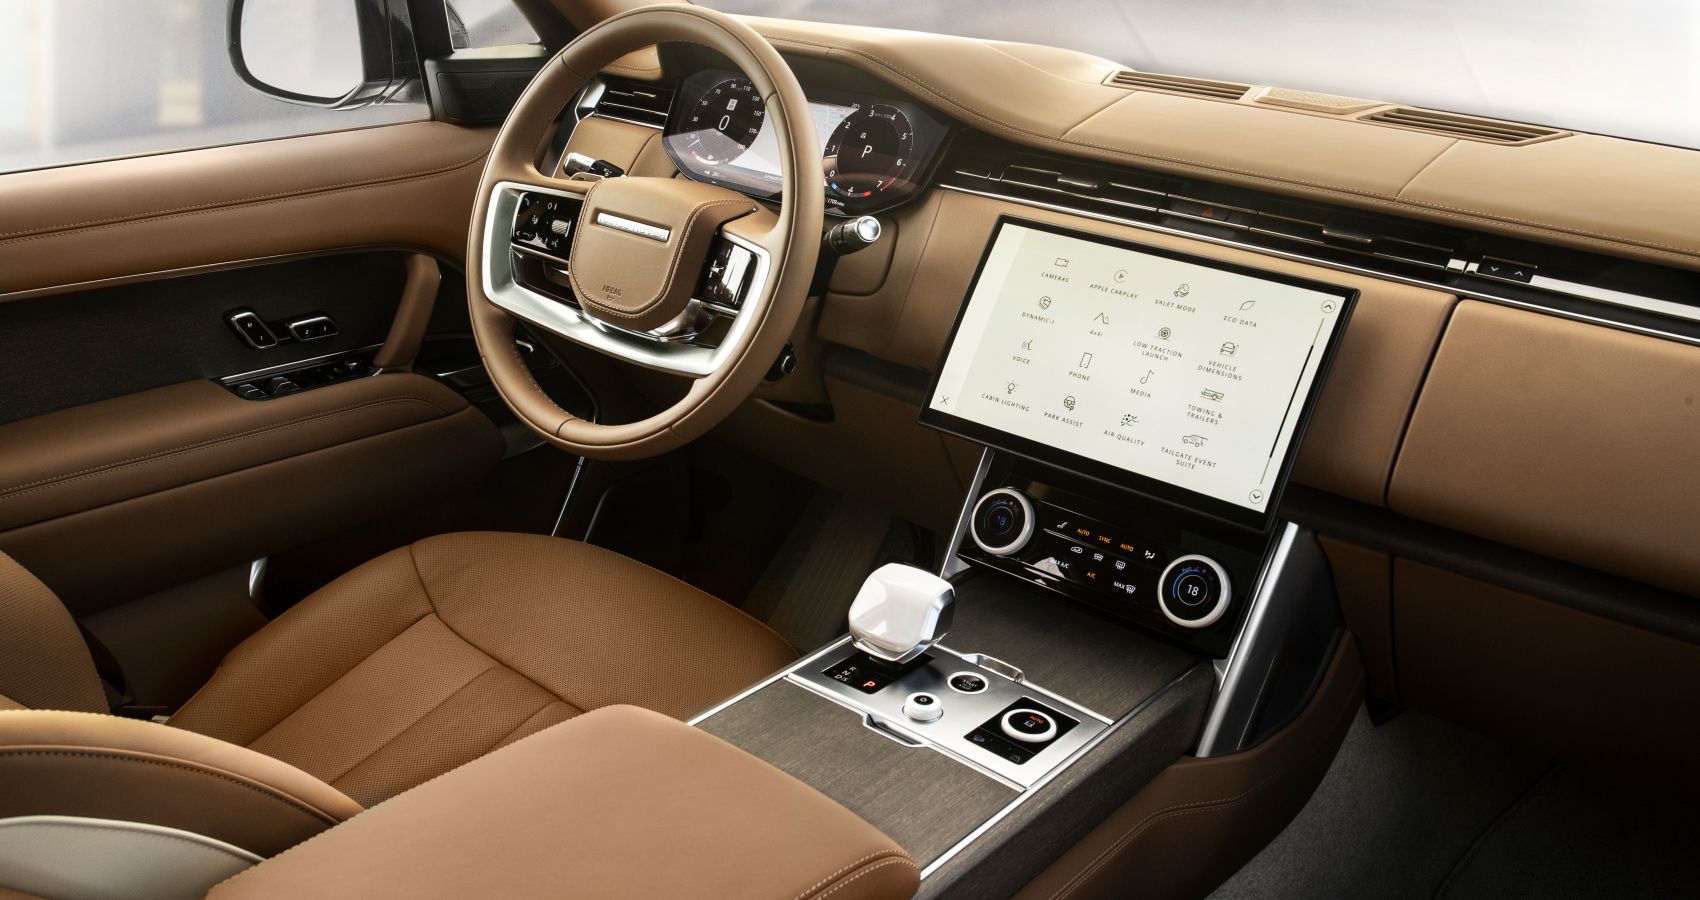 2023 Land Rover Range Rover SV Serenity dashboard layout view